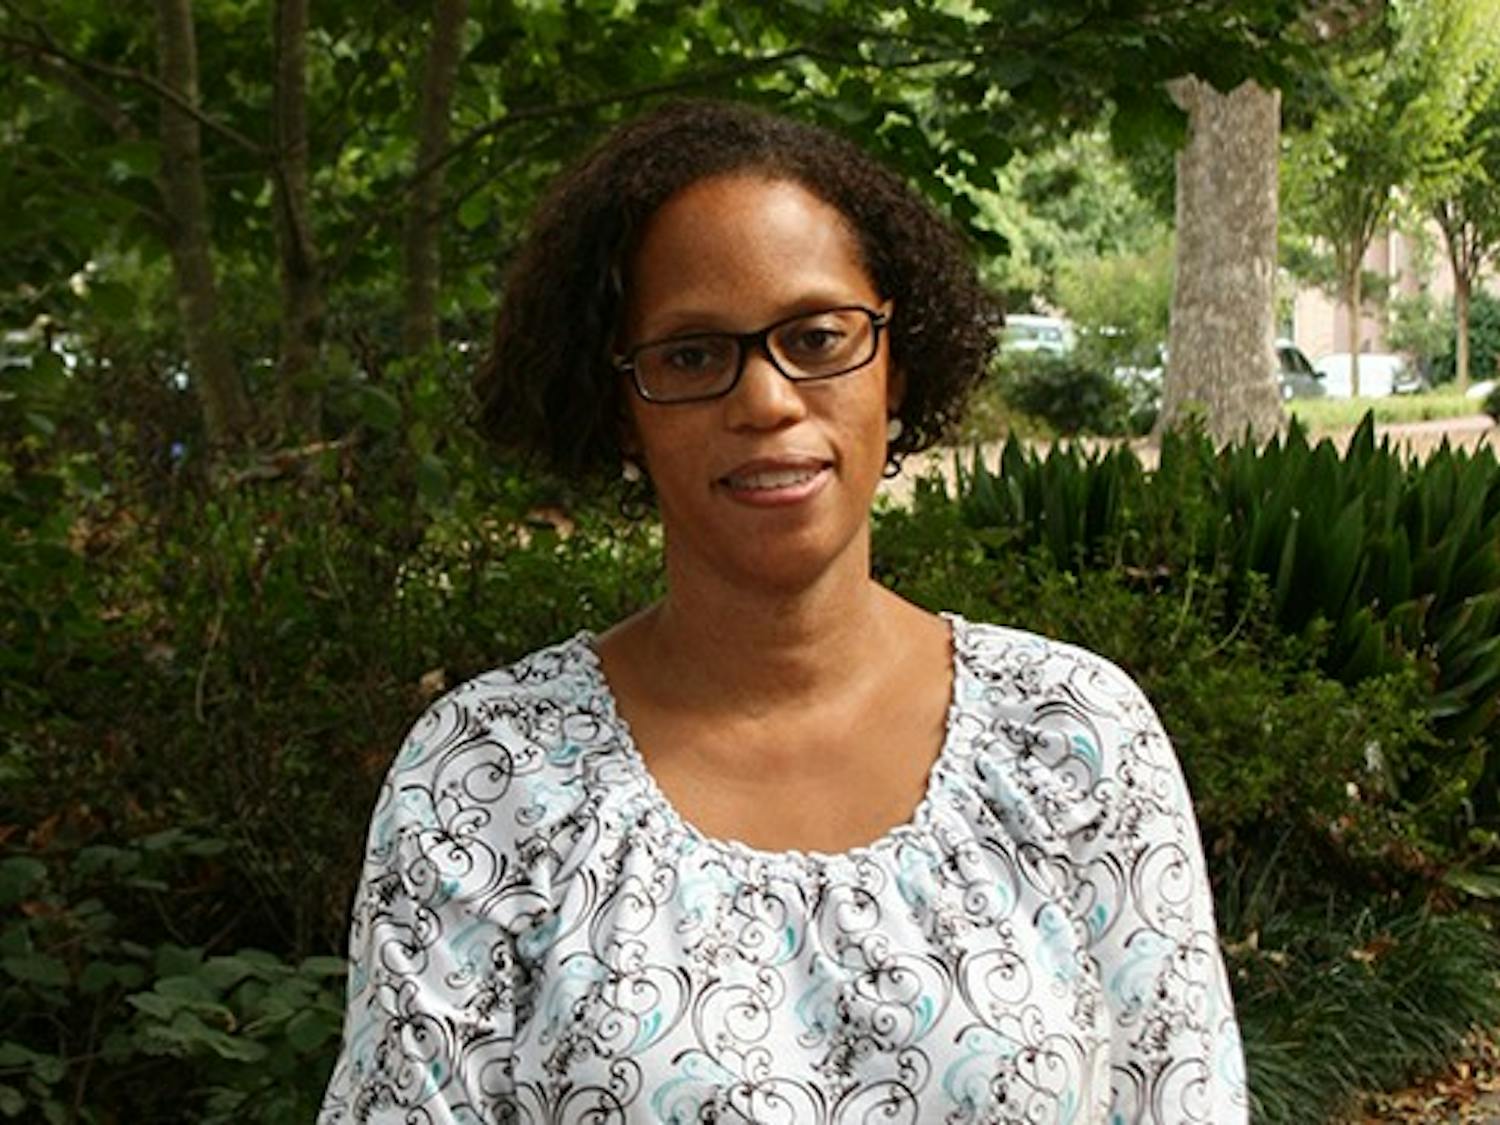 Karla Slocum PhD., was appointed the new head of The Institute for African American Studies in July. A graduate of UVA, she has been with UNC for 15 years, and is an Associate Professor in Anthropology